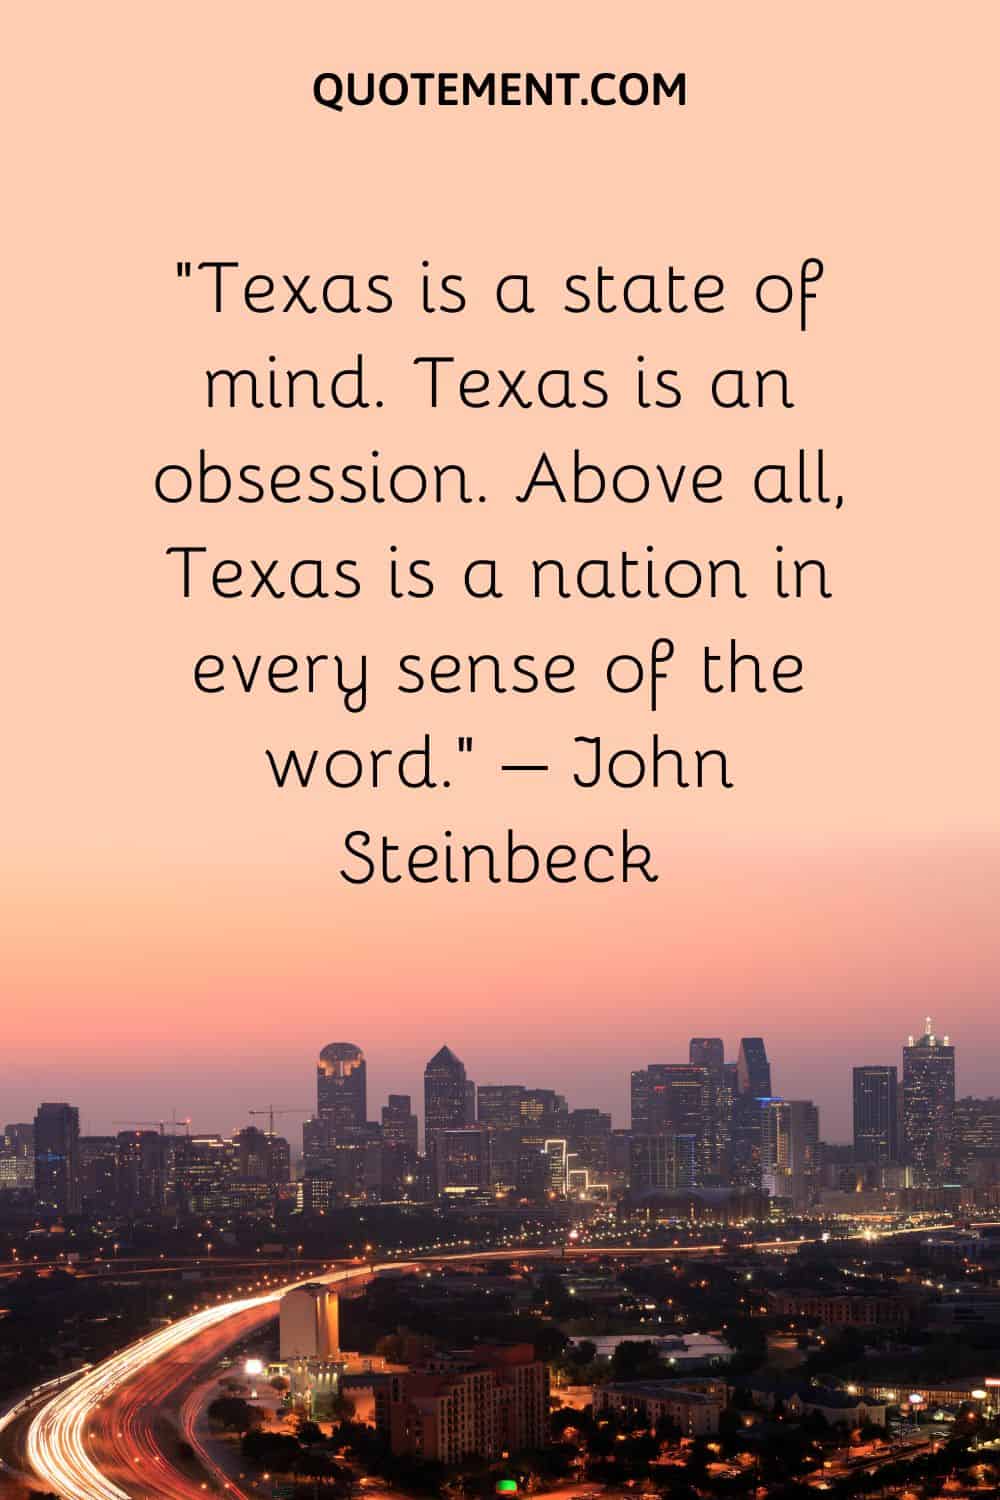 Texas is a state of mind. Texas is an obsession. Above all, Texas is a nation in every sense of the word. – John Steinbeck